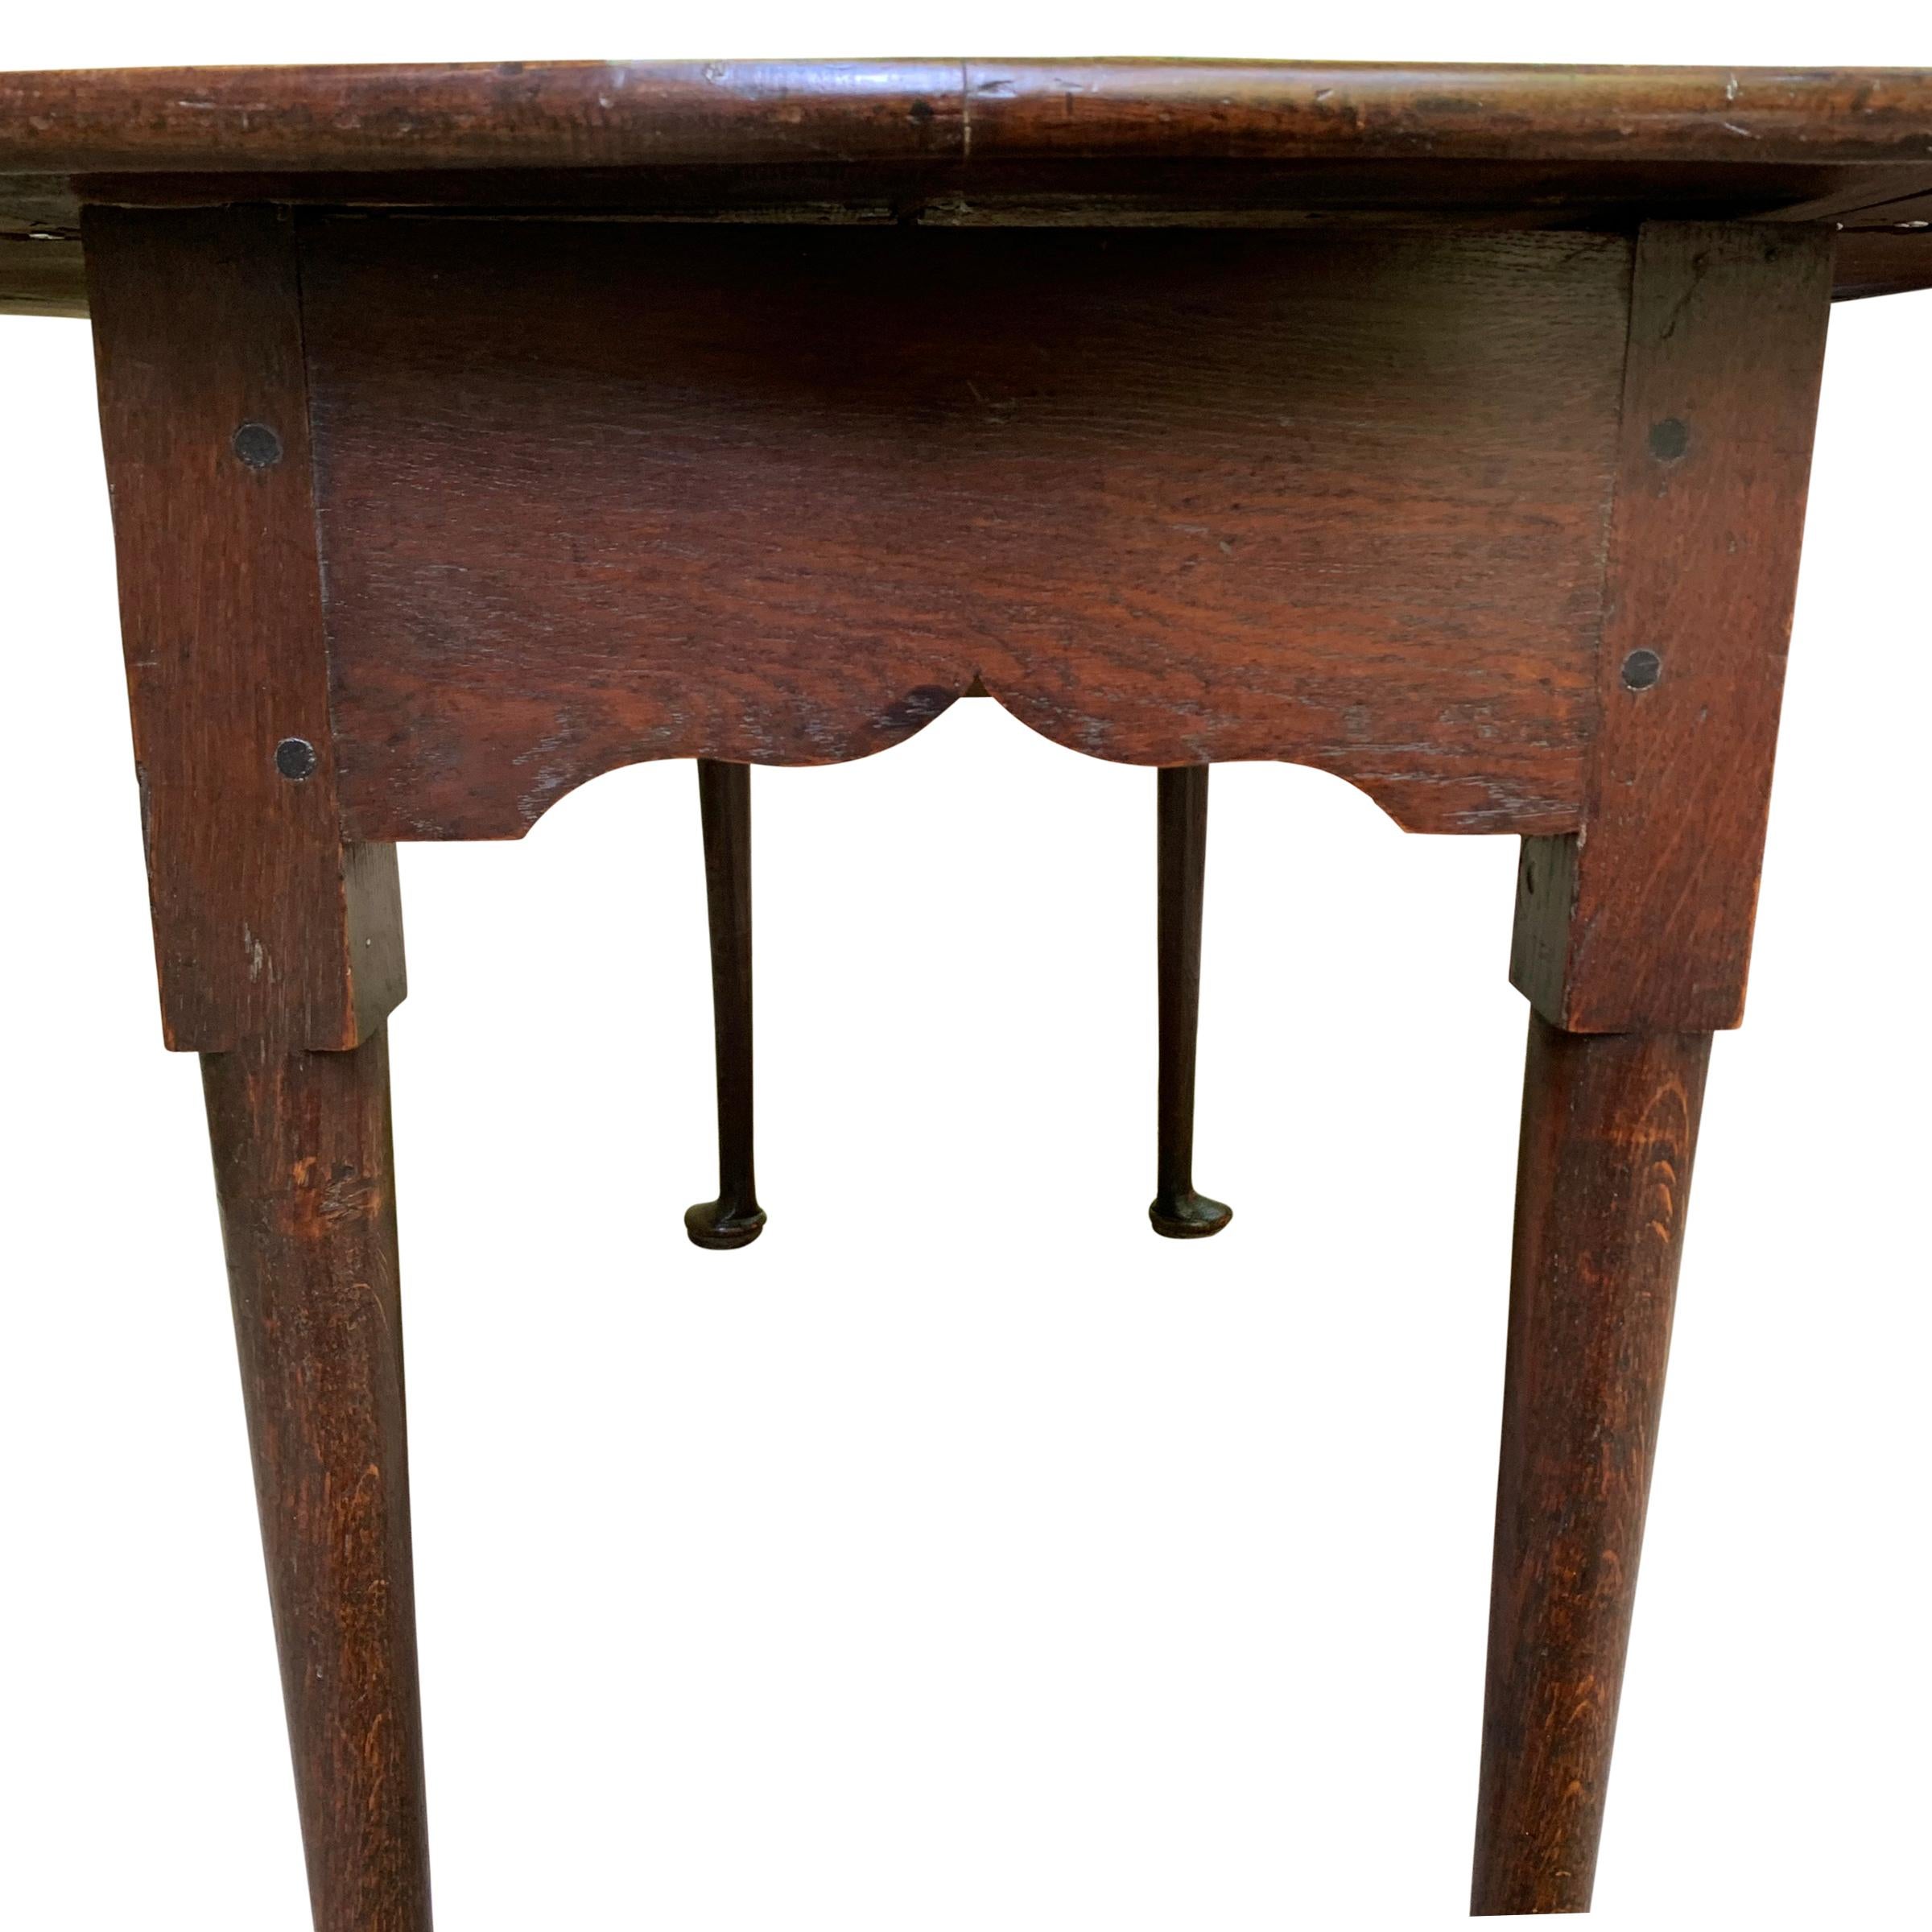 Early 19th Century English Queen Anne Gate-Leg Table 1